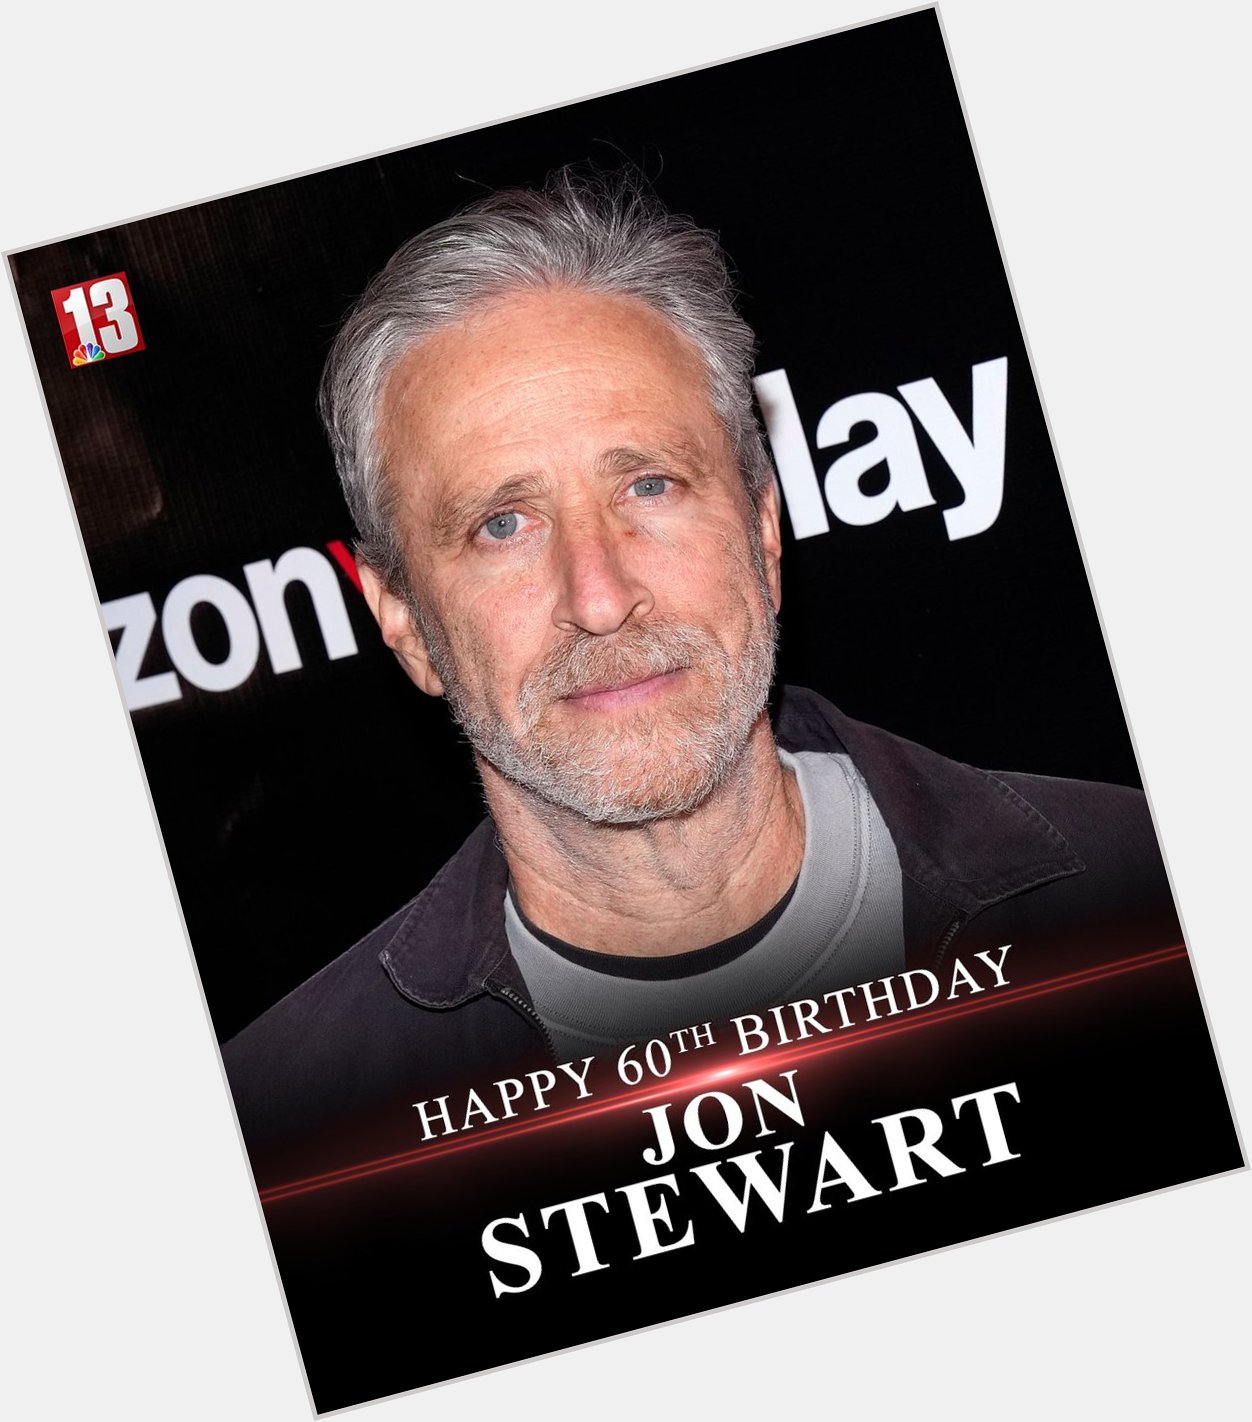   HAPPY BIRTHDAY! Jon Stewart, former host of \"The Daily Show\" on Comedy Central, is *60* today! 